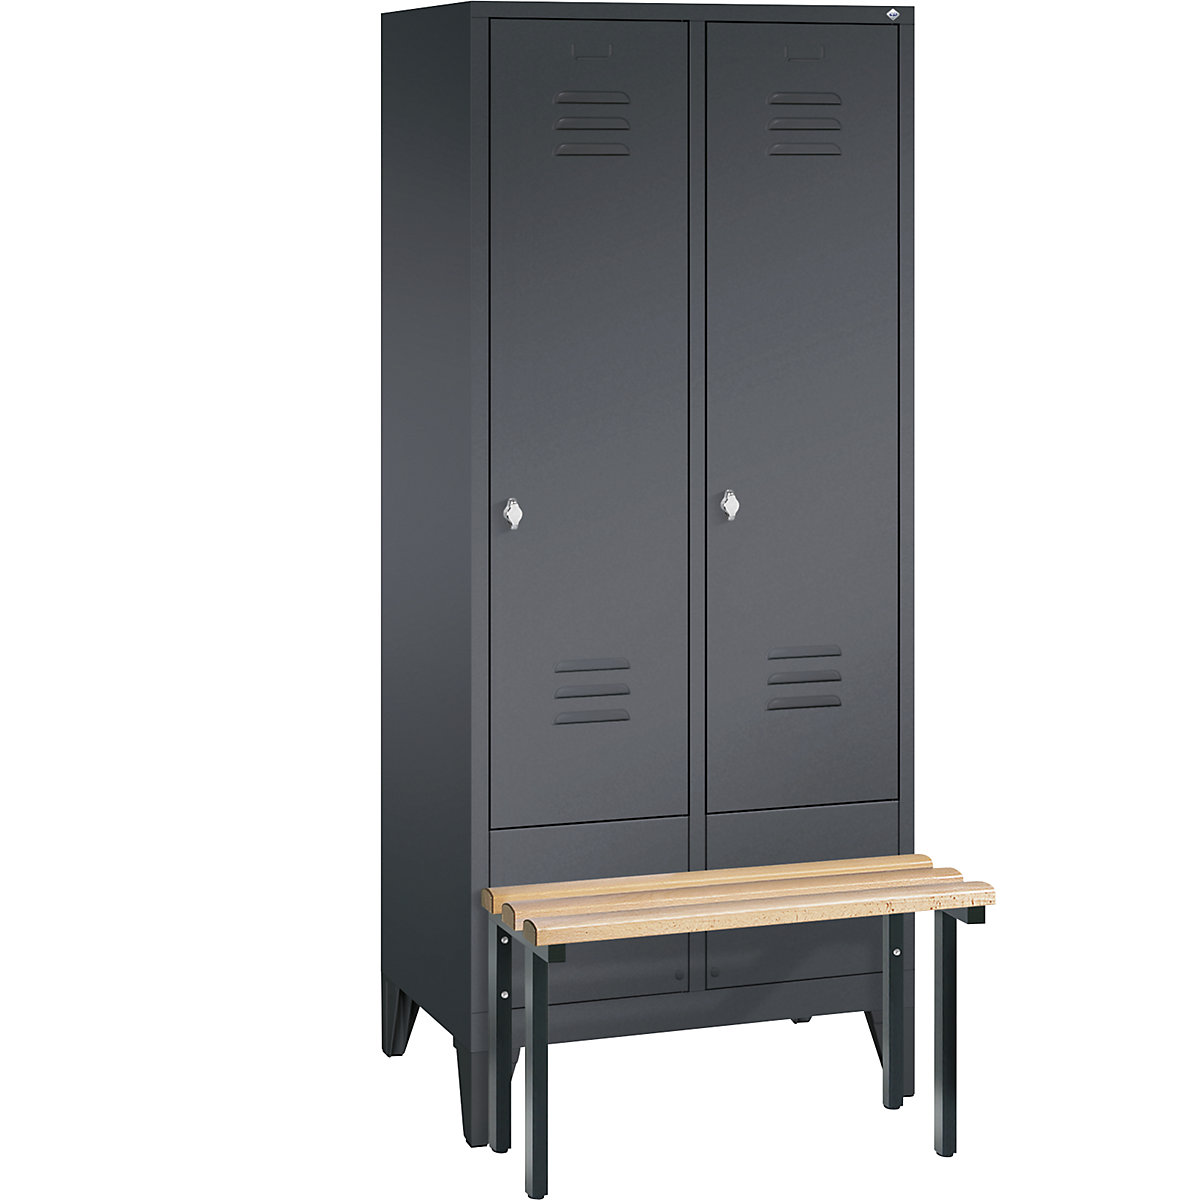 CLASSIC cloakroom locker with bench mounted in front – C+P, 2 compartments, compartment width 400 mm, black grey-3